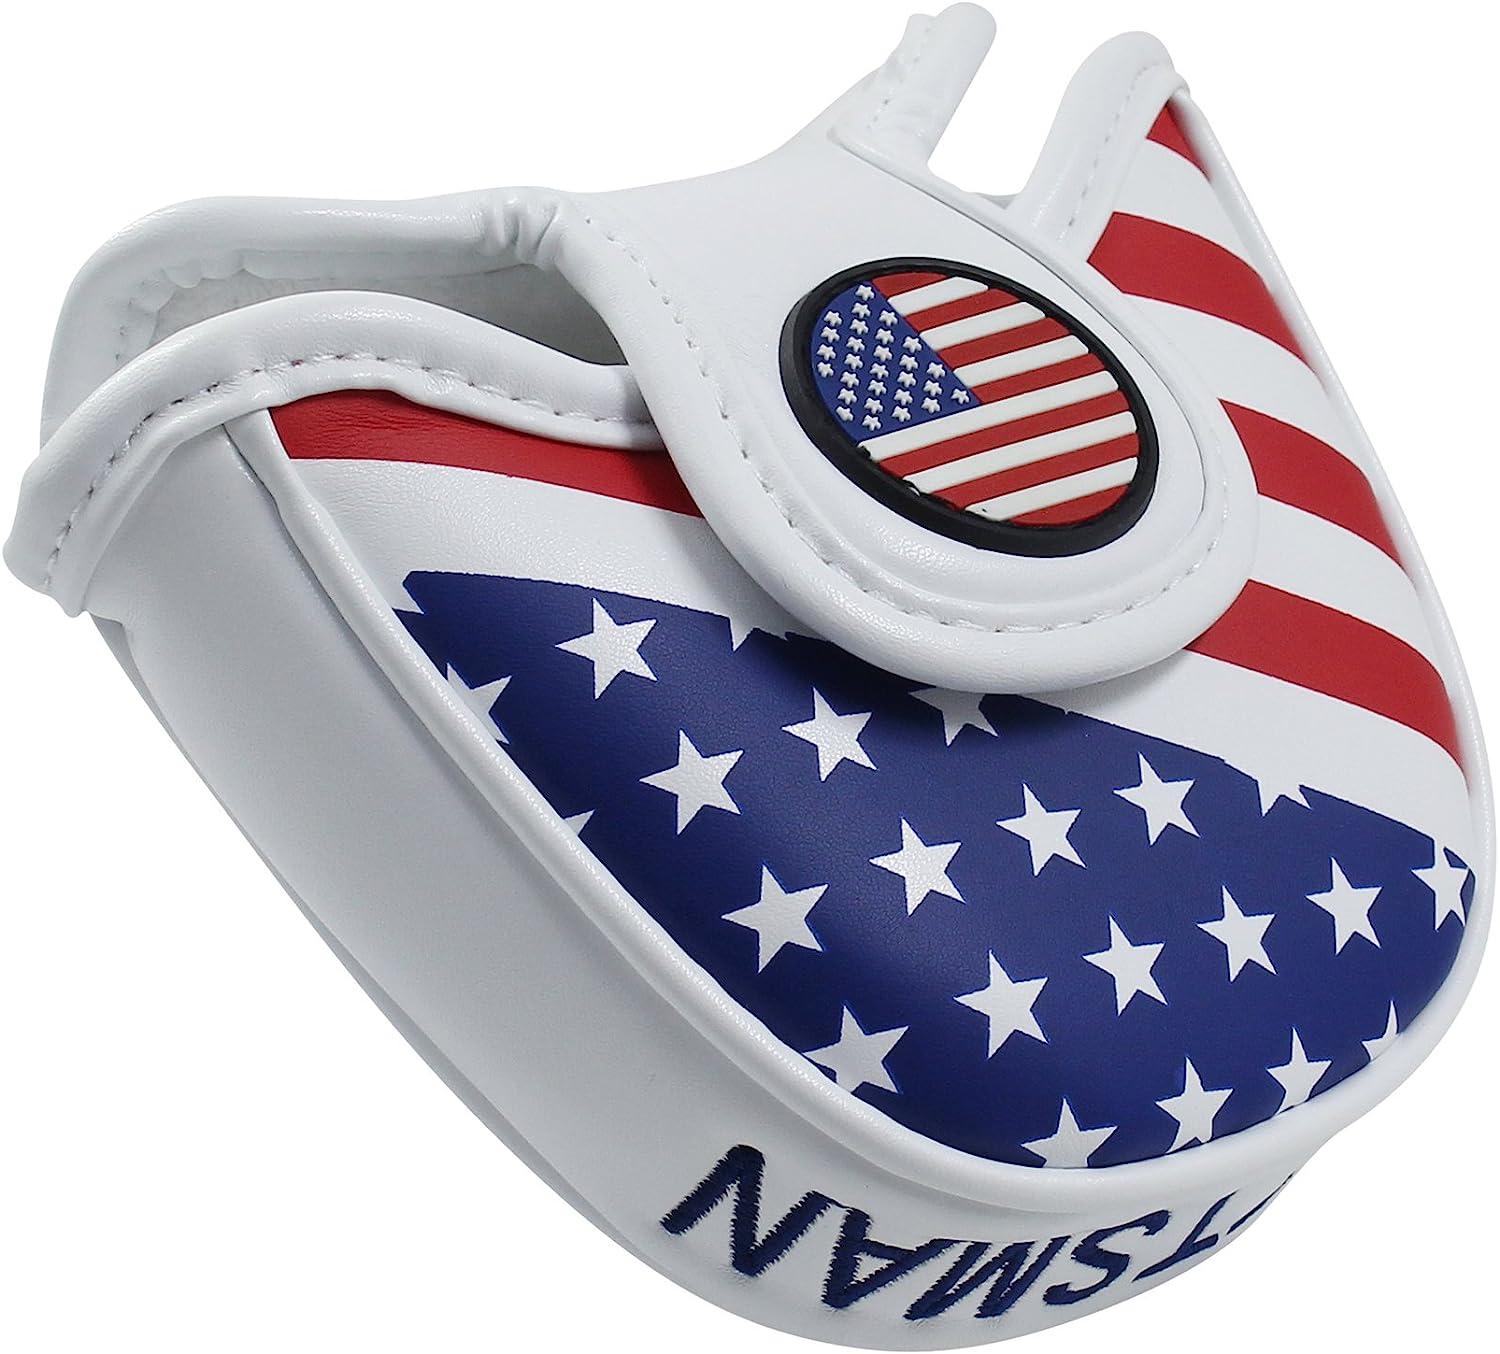 Craftsman Golf Stars and Stripes Flag Headcover Head Cover for Scotty Cameron TaylorMade Odyssey Driver Fairway Wood Hybrid